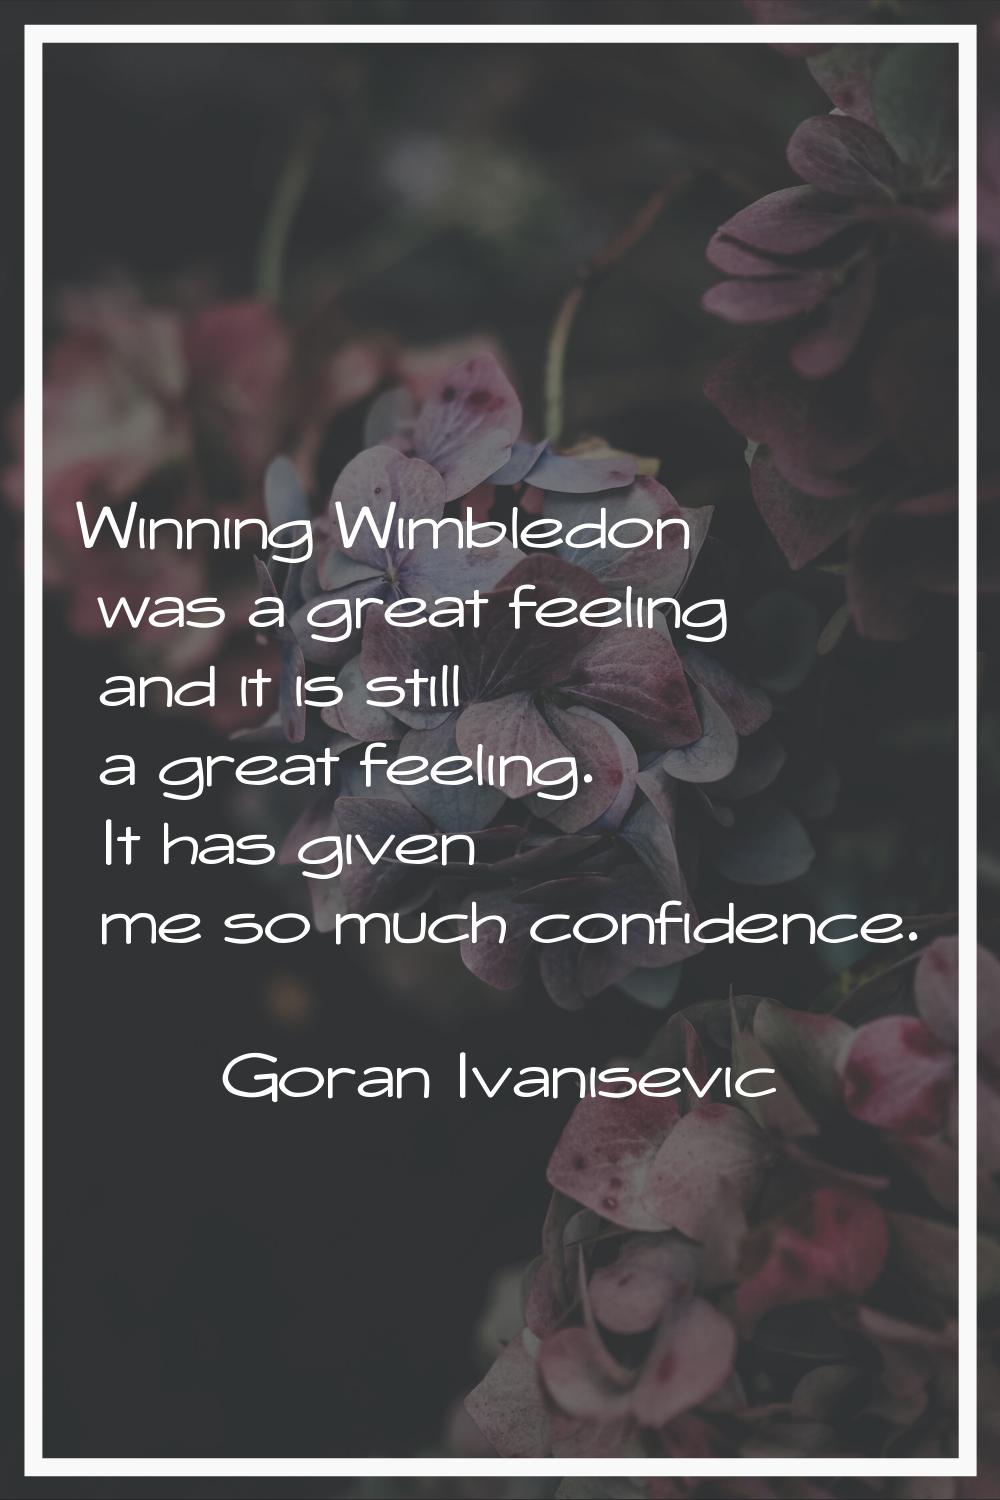 Winning Wimbledon was a great feeling and it is still a great feeling. It has given me so much conf